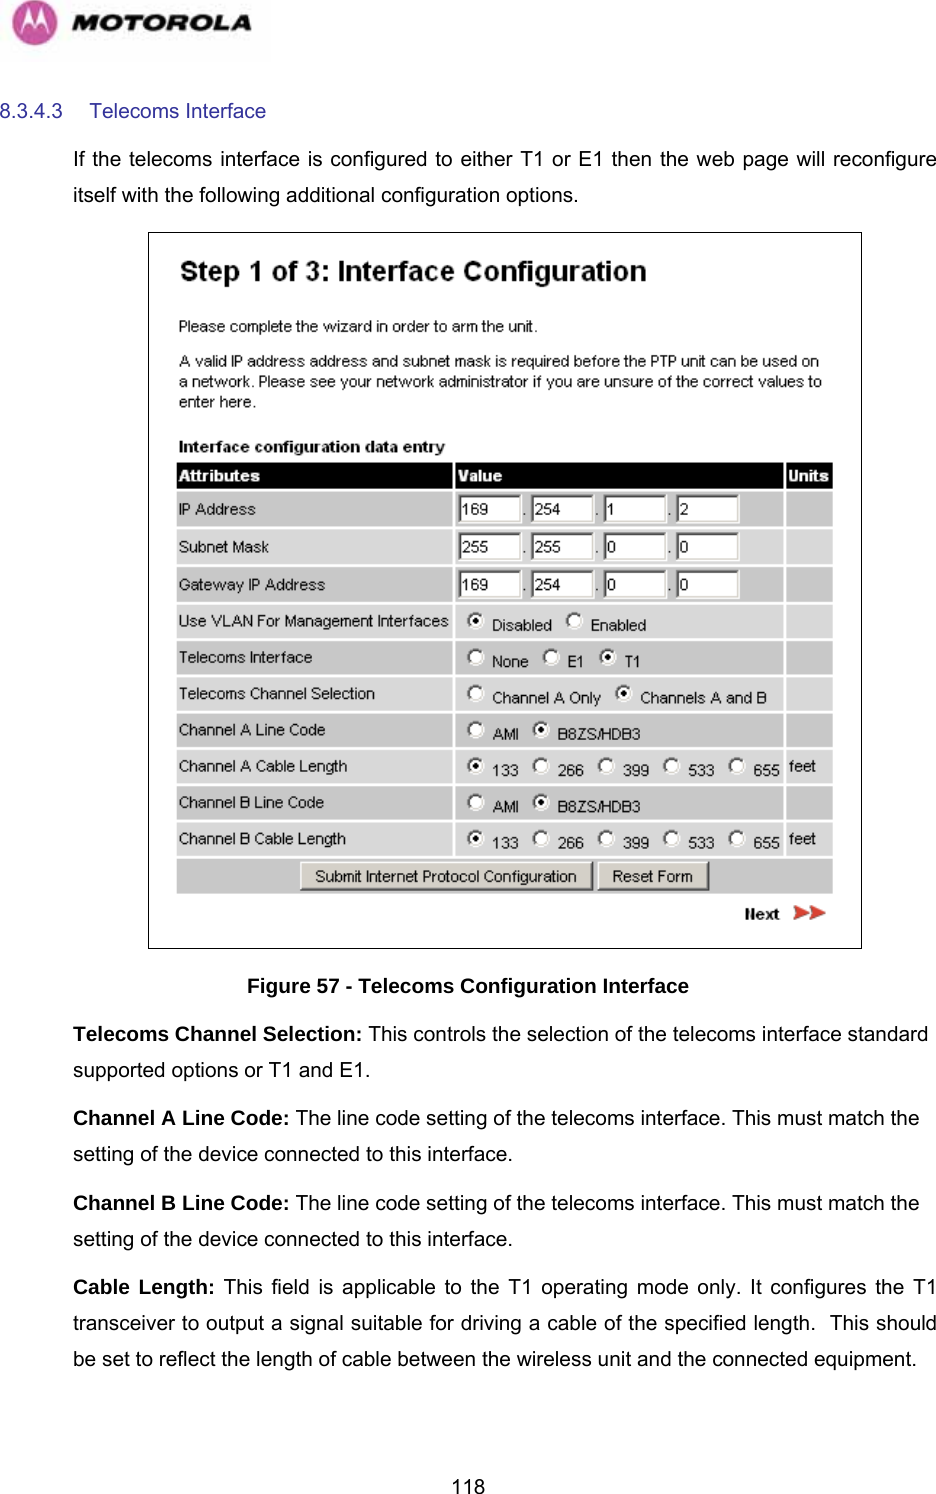   1188.3.4.3 Telecoms Interface If the telecoms interface is configured to either T1 or E1 then the web page will reconfigure itself with the following additional configuration options.  Figure 57 - Telecoms Configuration Interface Telecoms Channel Selection: This controls the selection of the telecoms interface standard supported options or T1 and E1. Channel A Line Code: The line code setting of the telecoms interface. This must match the setting of the device connected to this interface. Channel B Line Code: The line code setting of the telecoms interface. This must match the setting of the device connected to this interface. Cable Length: This field is applicable to the T1 operating mode only. It configures the T1 transceiver to output a signal suitable for driving a cable of the specified length.  This should be set to reflect the length of cable between the wireless unit and the connected equipment.  